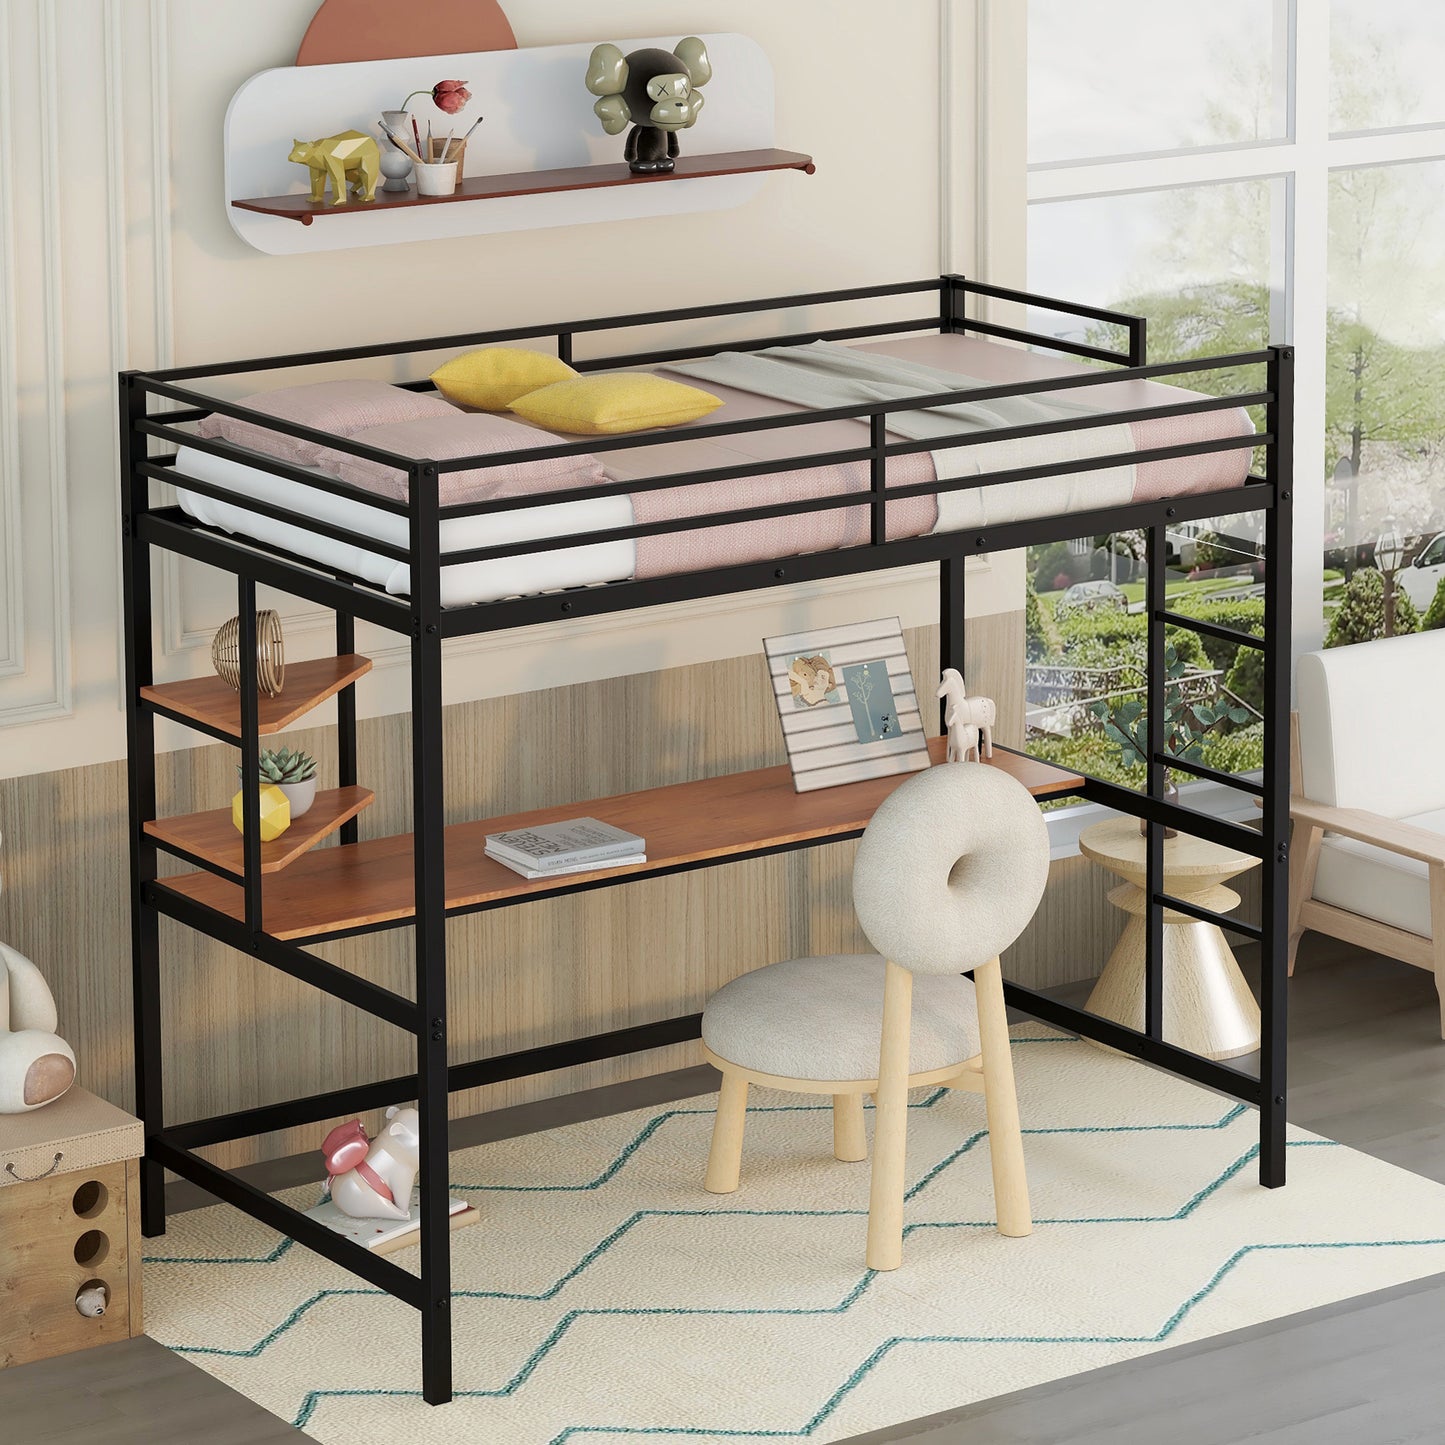 Twin Loft Bed Frame with Desk for Teens Kids, Classic Metal Bed Frames in Twin with Desk Ladder and Guardrails, Kids Bed Frame, Black, LJ503